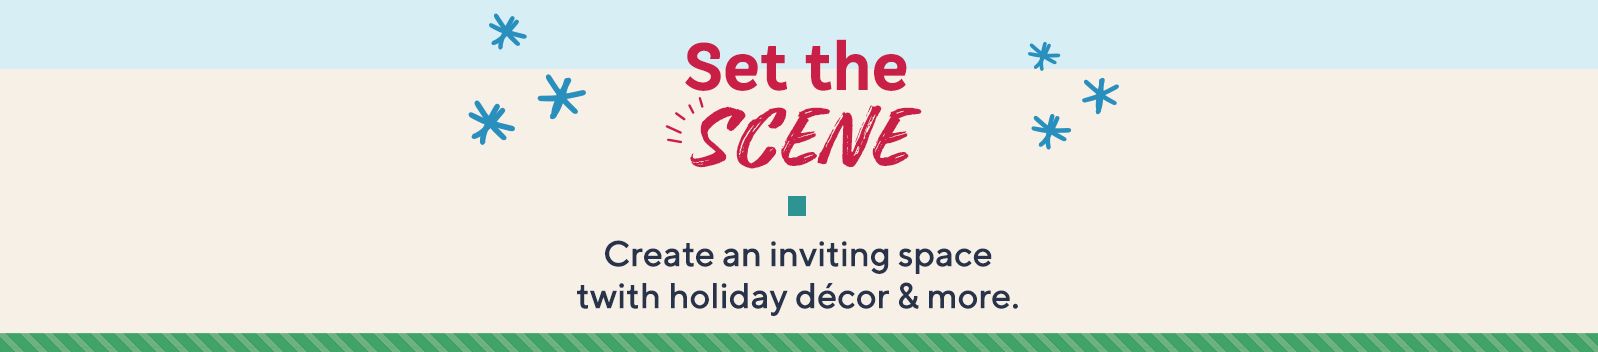 Set the Scene.  Create an inviting space with holiday décor & more.